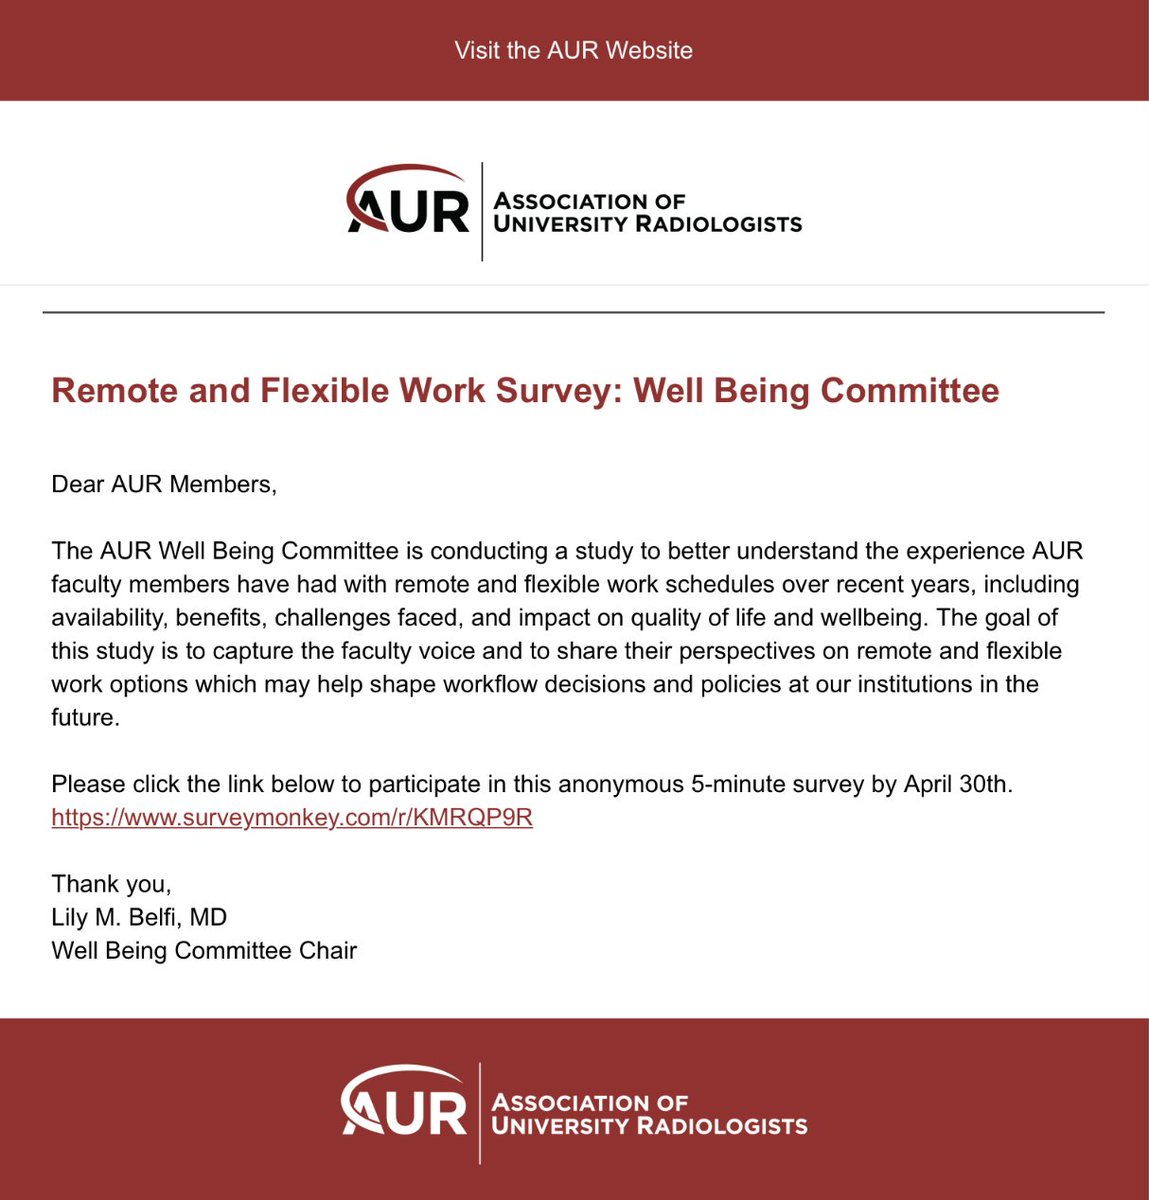 AUR Members: Have you had any experience with remote or flexible work schedules? The @AurWellBeing Committee wants to hear from you! Please fill out this anonymous 3 minute survey: surveymonkey.com/r/KMRQP9R @AURtweet @ACER_AUR @AMSERRads @ALChetlen @AnnJayMD1 @AverillMd @LoriDeitte